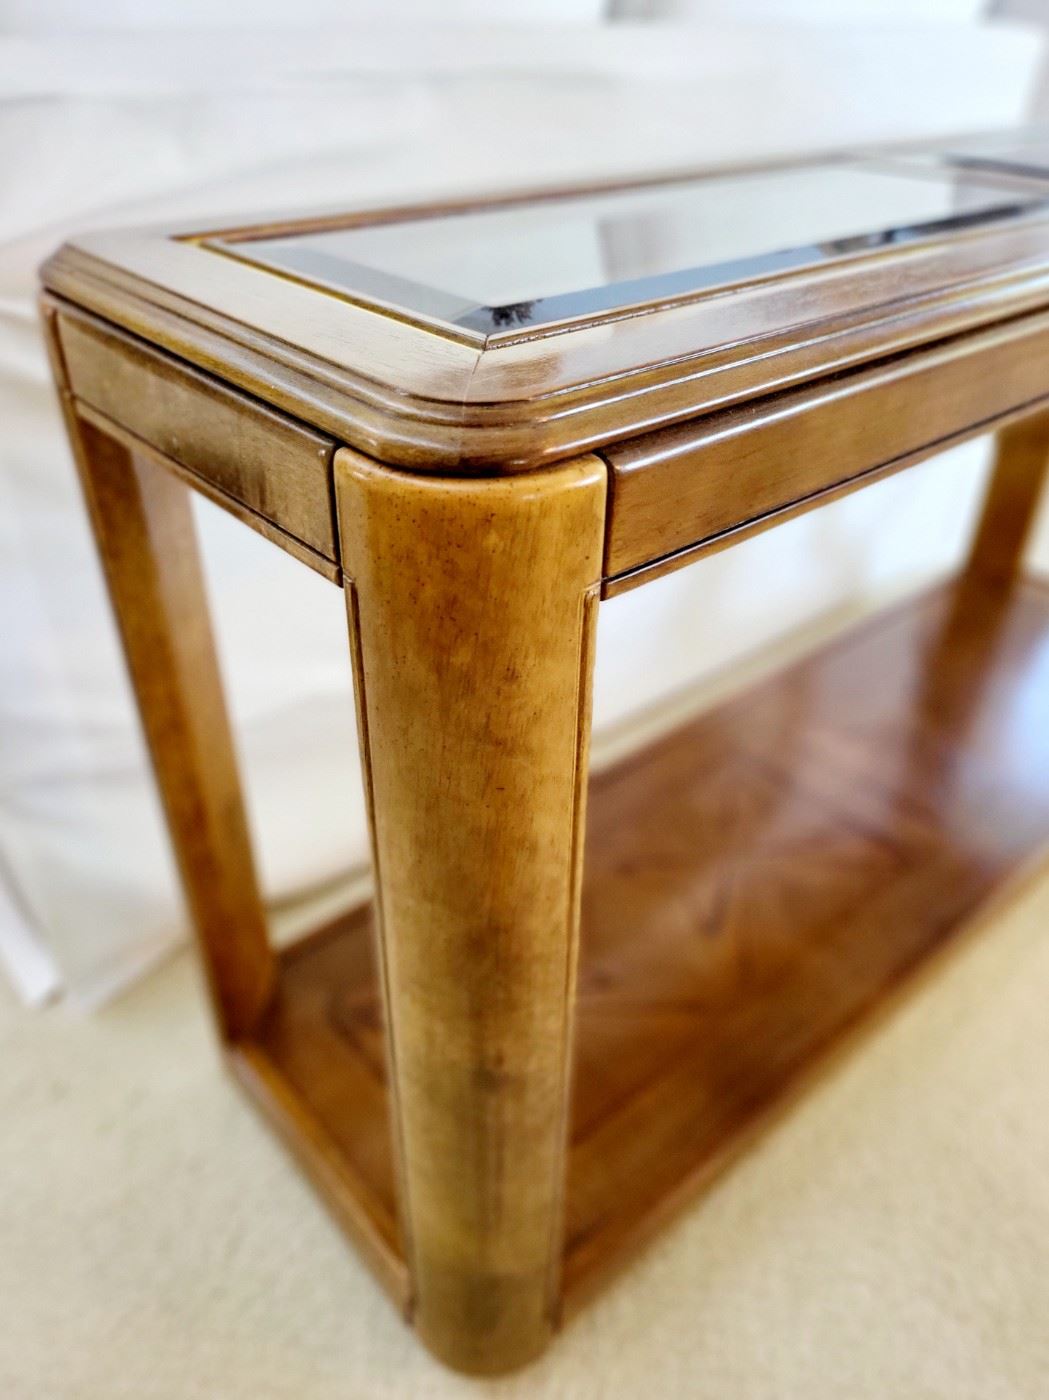 Sofa Table with Beveled Glass inserts $95 and NOW 50% OFF